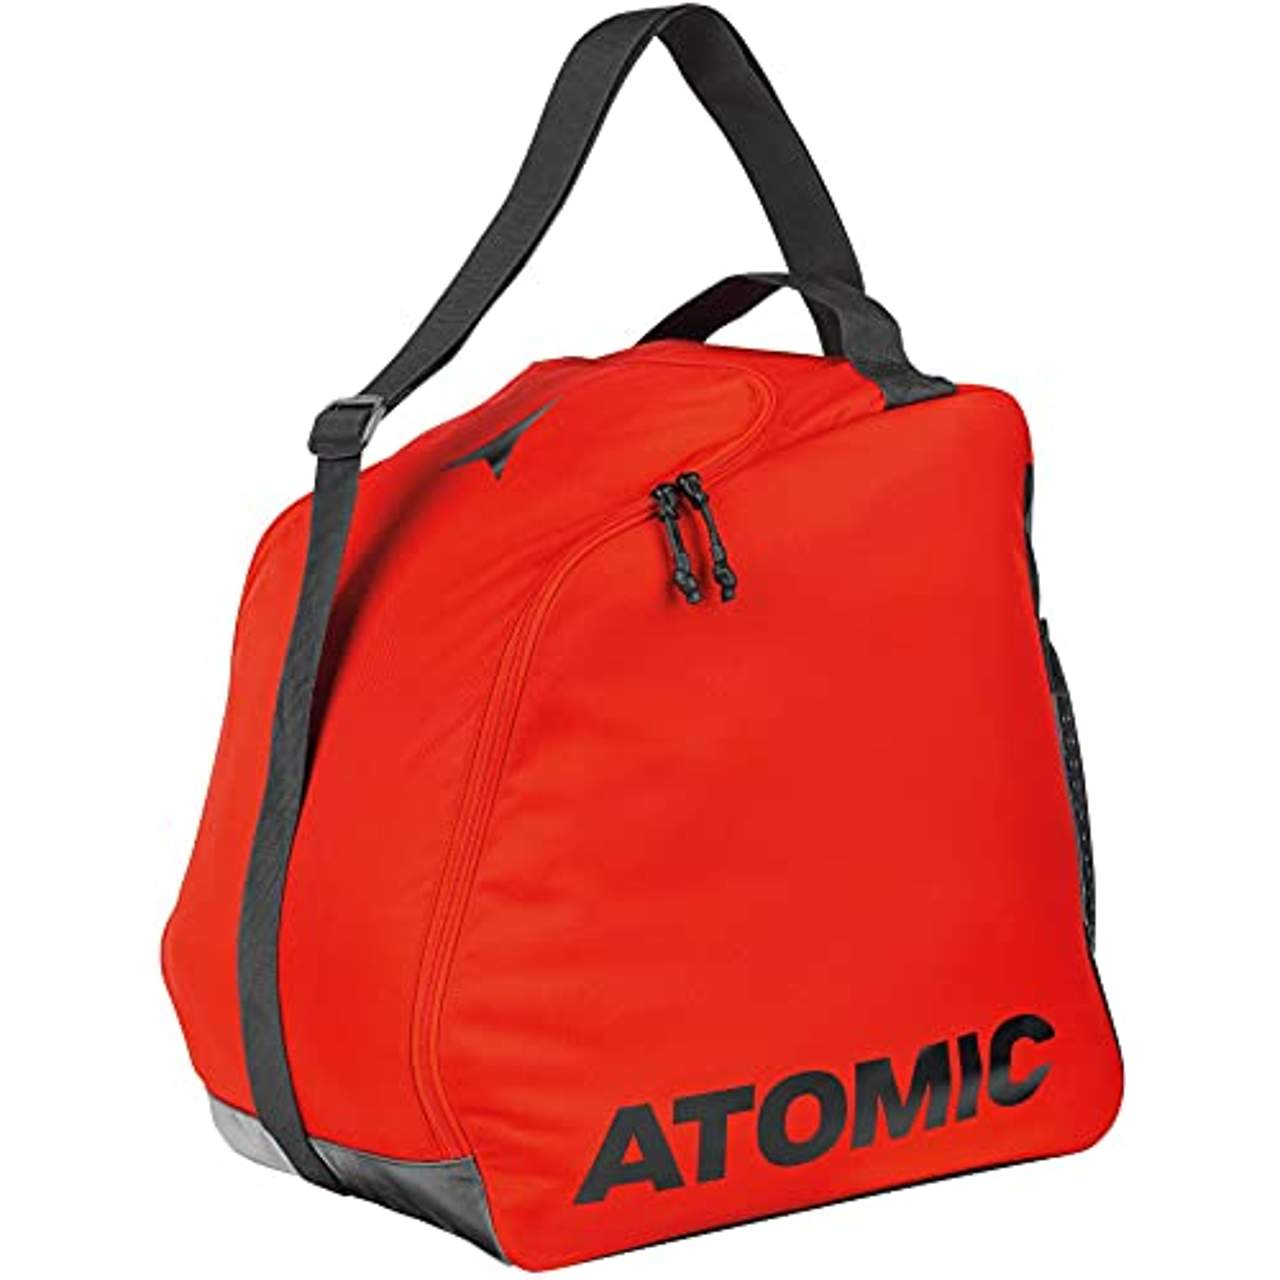 ATOMIC Boot Bag 2.0 Bright red